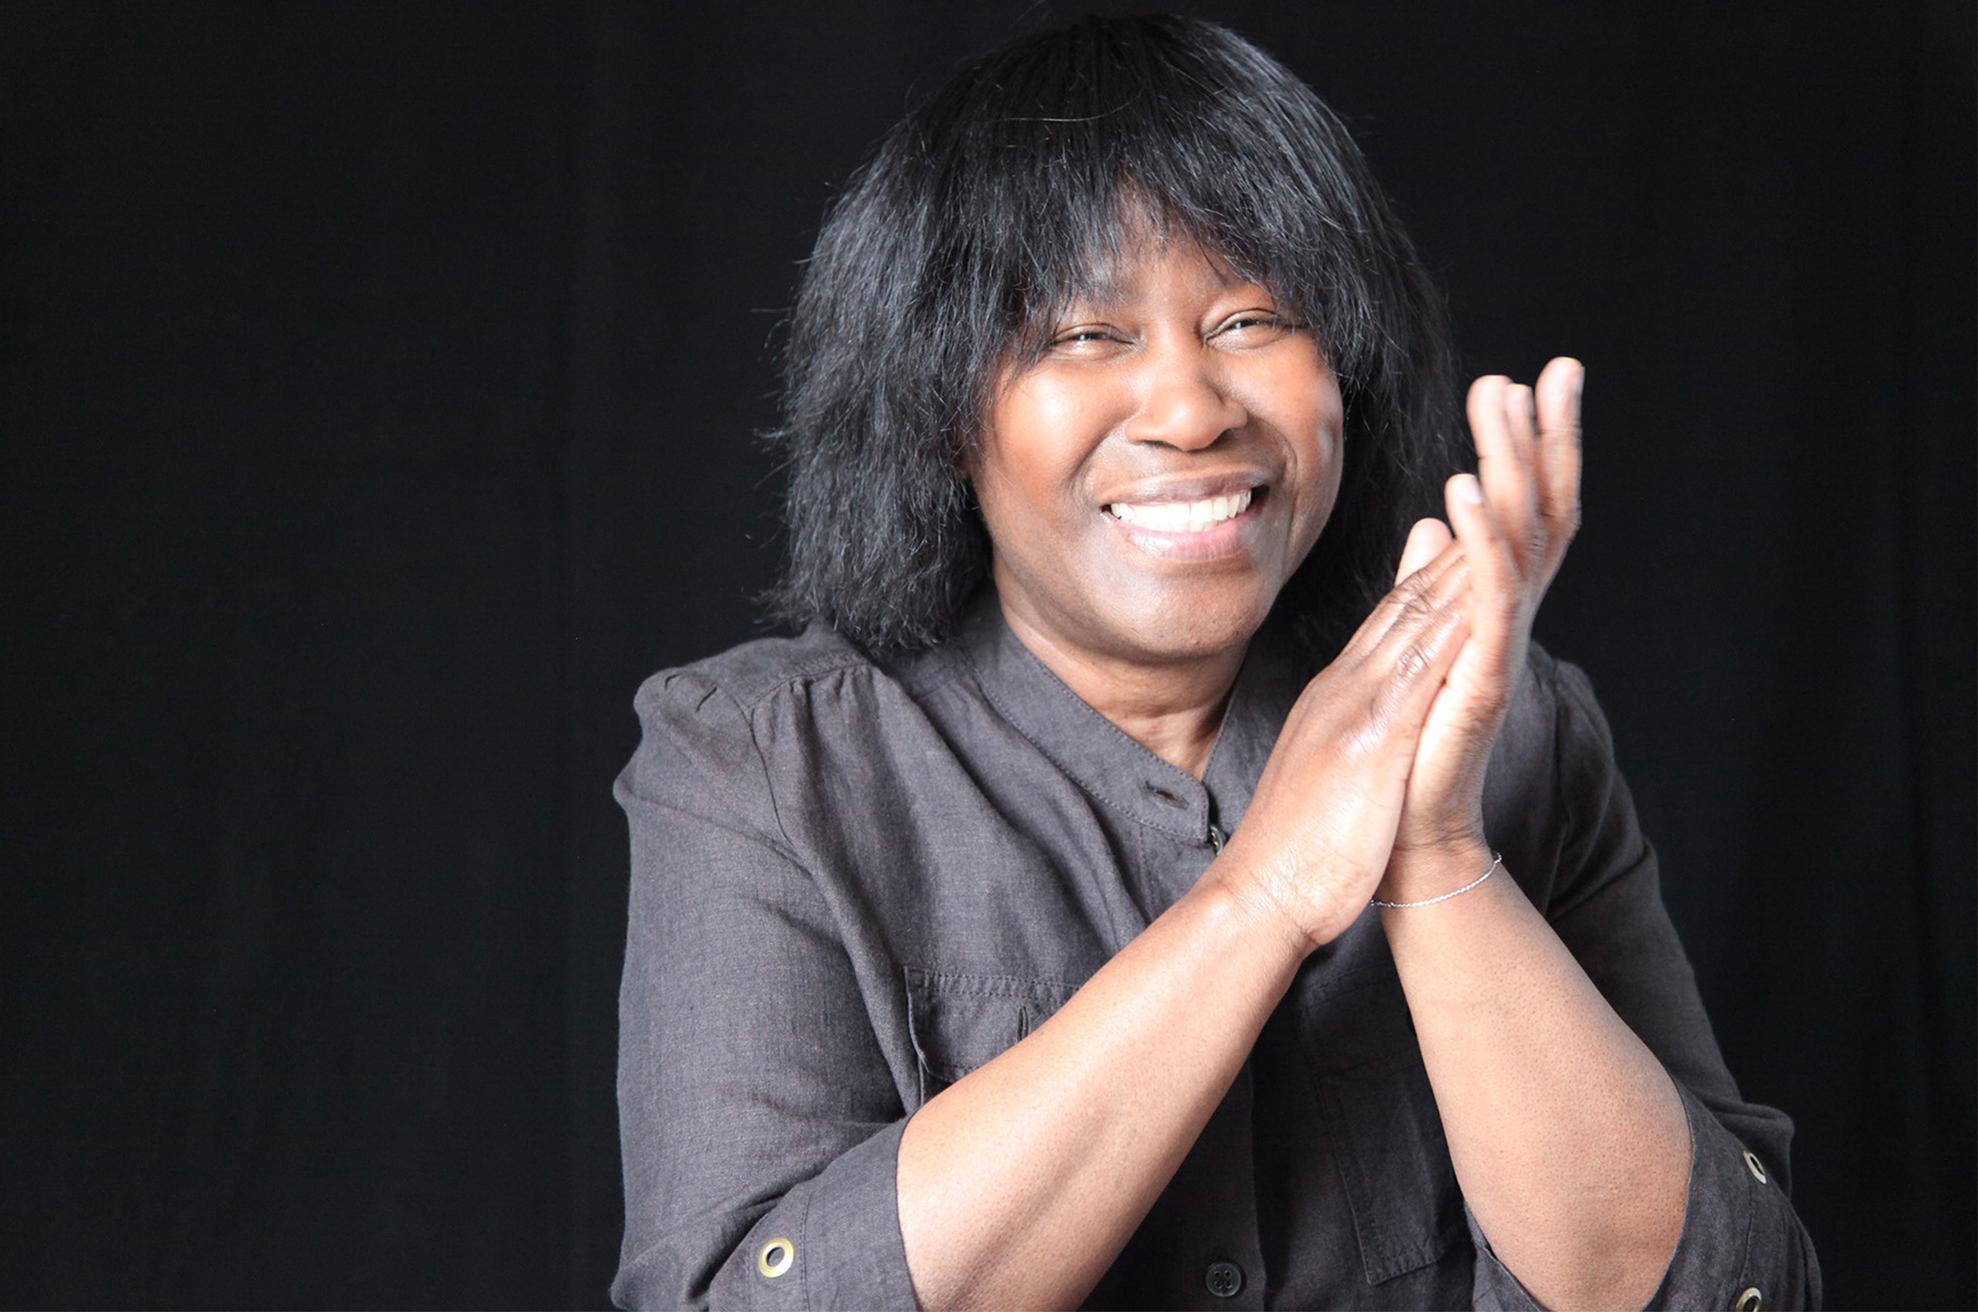 Expect love, affection, and a few nerves from Joan Armatrading as she